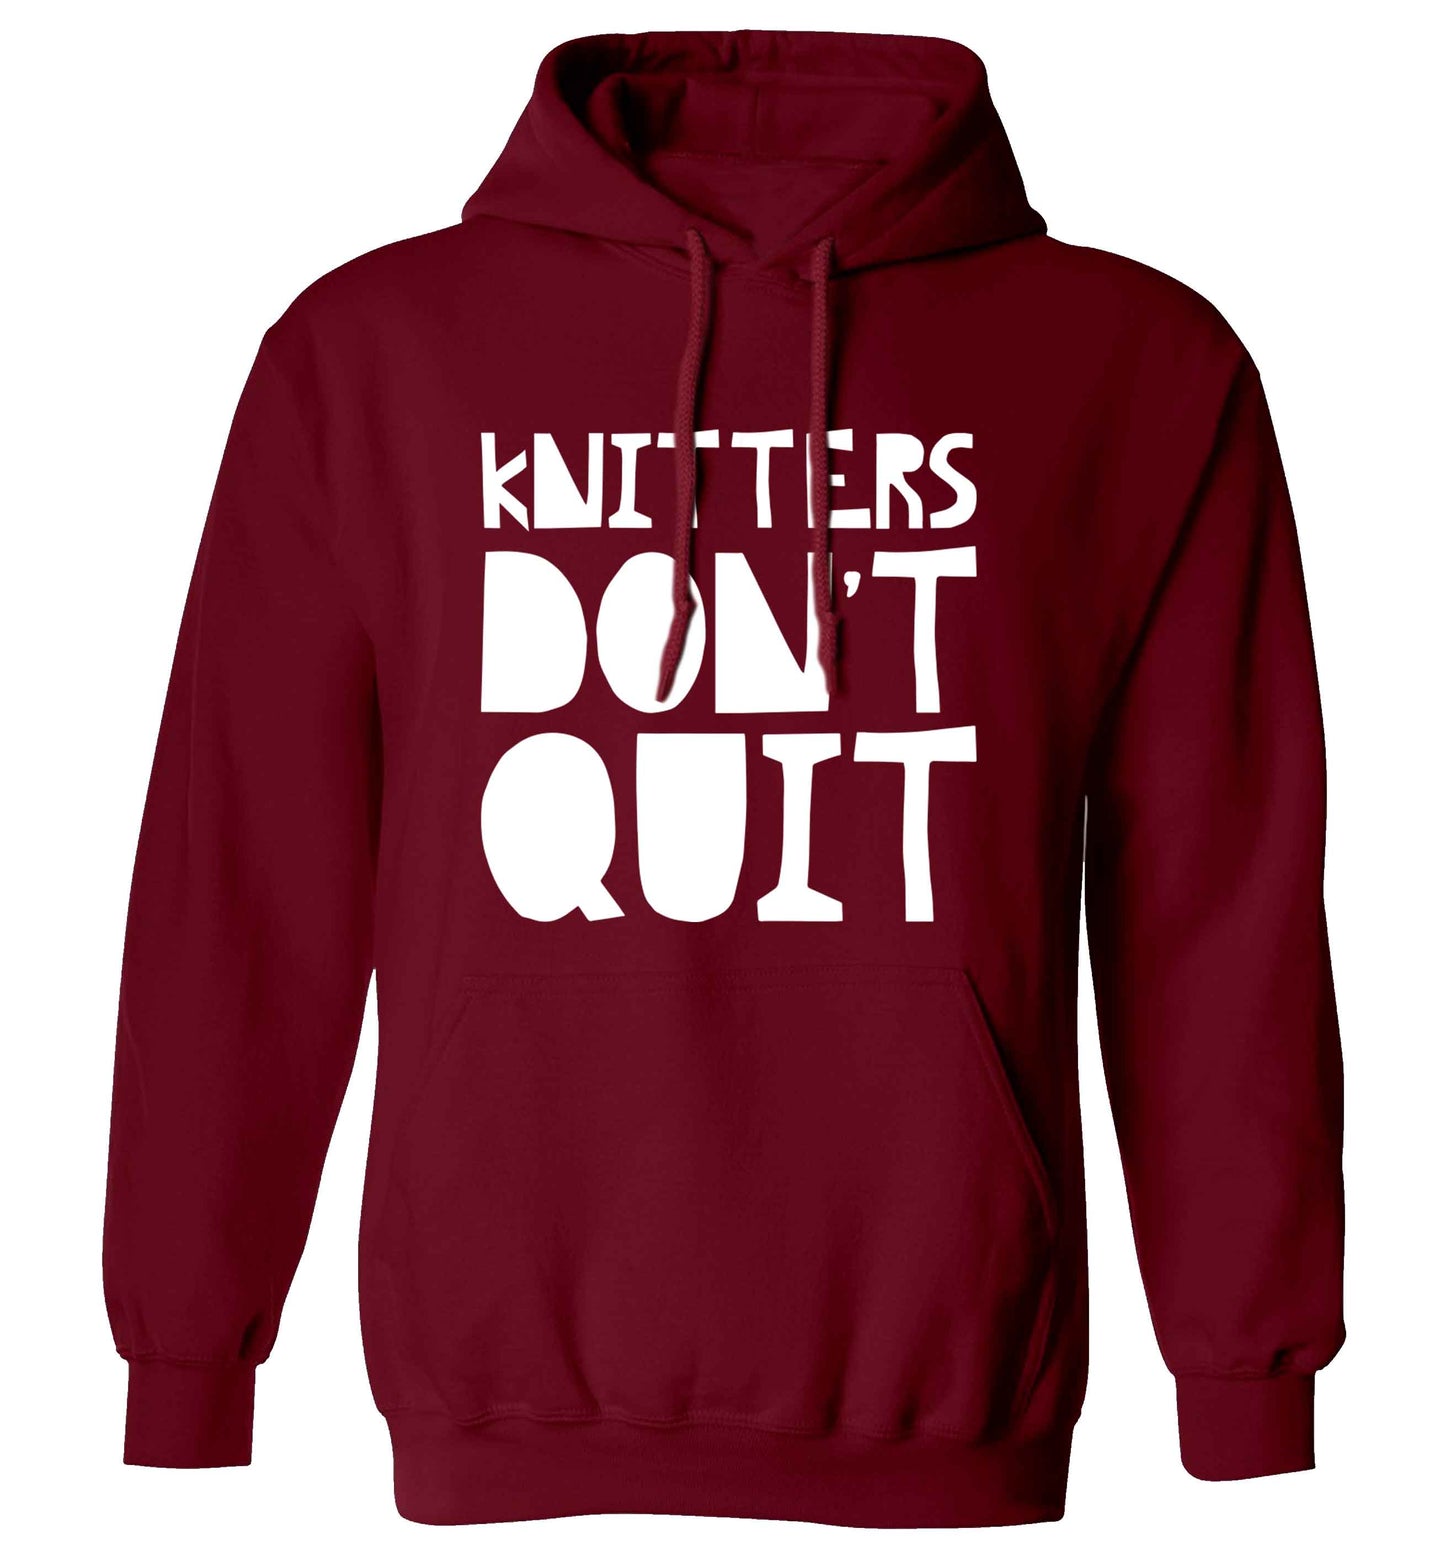 Knitters don't quit adults unisex maroon hoodie 2XL